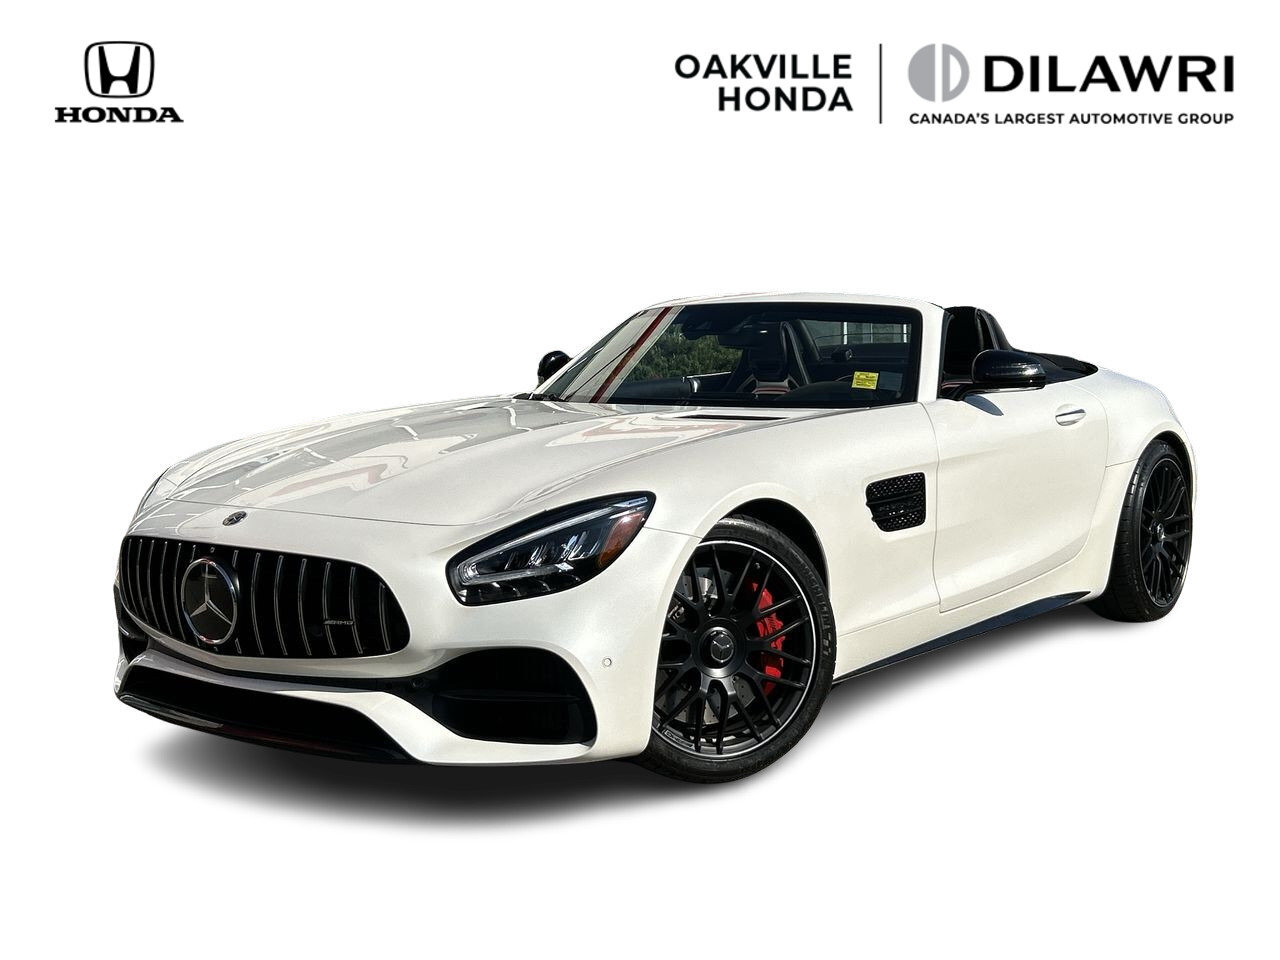 2021 Mercedes-Benz AMG GT C Roadster Lease Options Available  | Convertible